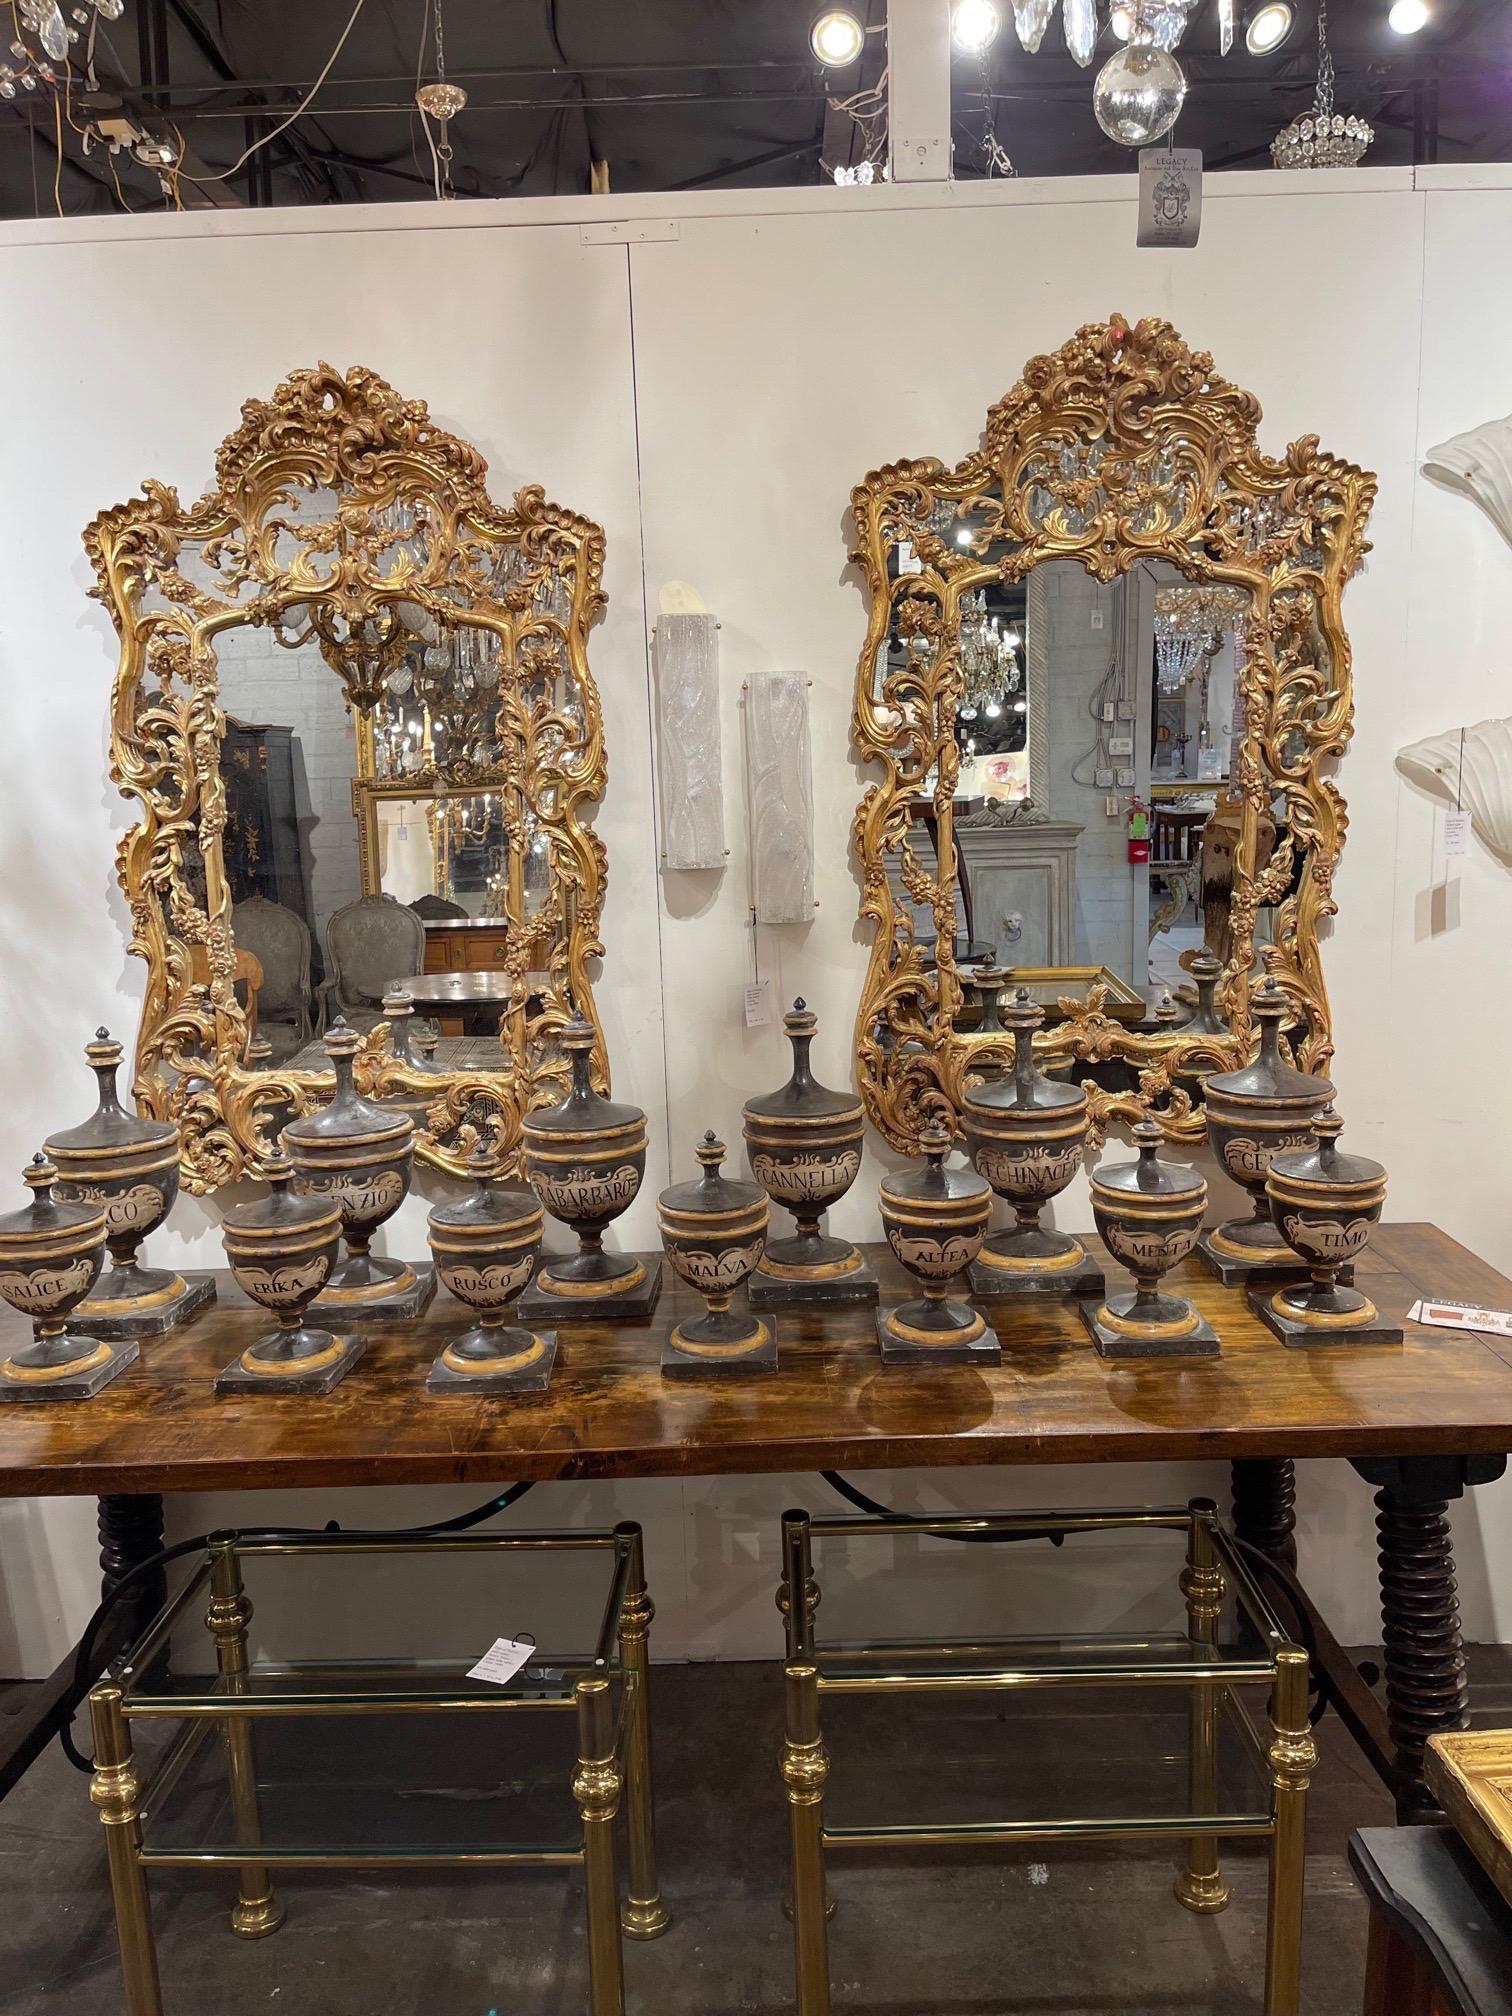 Gorgeous pair of Italian carved and giltwood mirrors. Very fine ornate carvings on these. A fabulous decorative element for a fine home! Note: 9800 for the pair